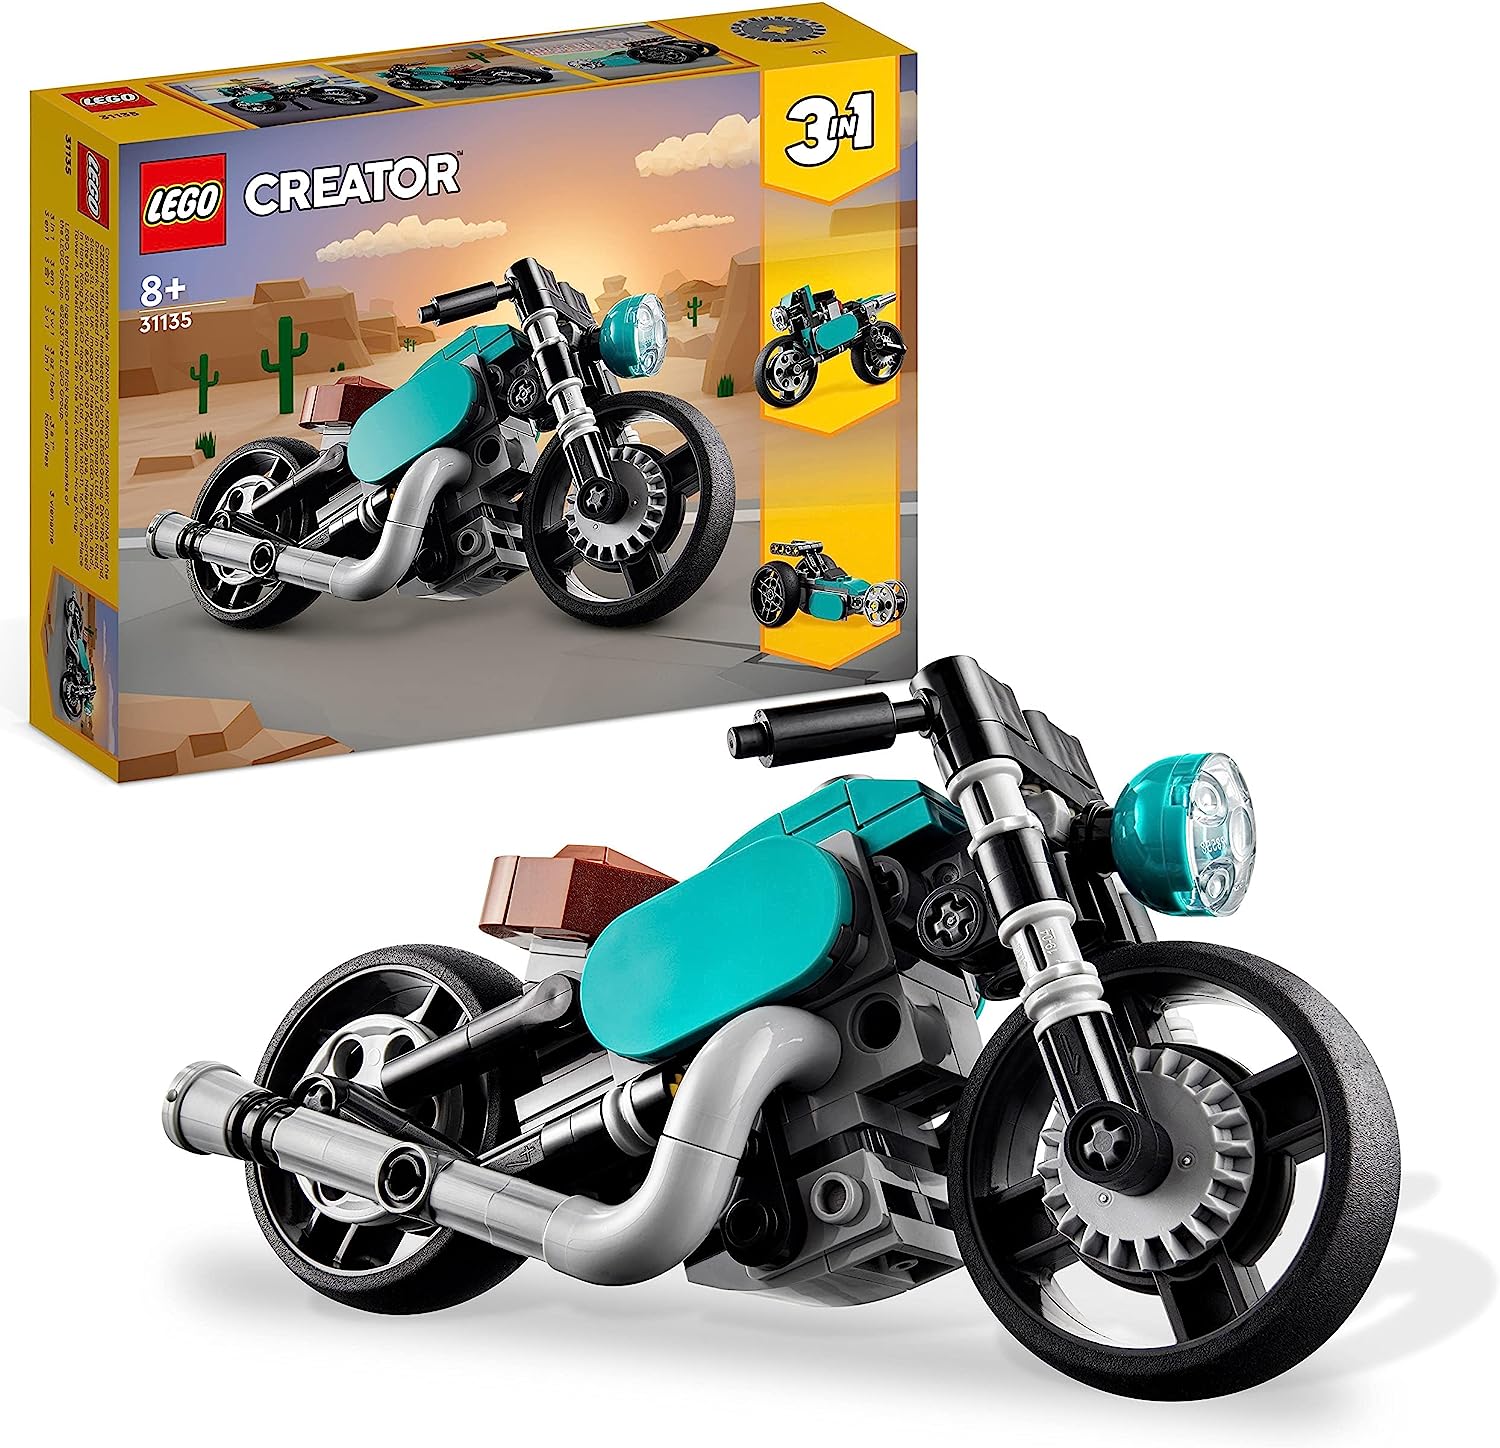 LEGO 31135 Creator 3-in-1 Vintage Motorcycle Set, Classic Motorcycle Toy From Road Motorcycle to Dragster Car, Vehicle Construction Toy for Children, Boys and Girls